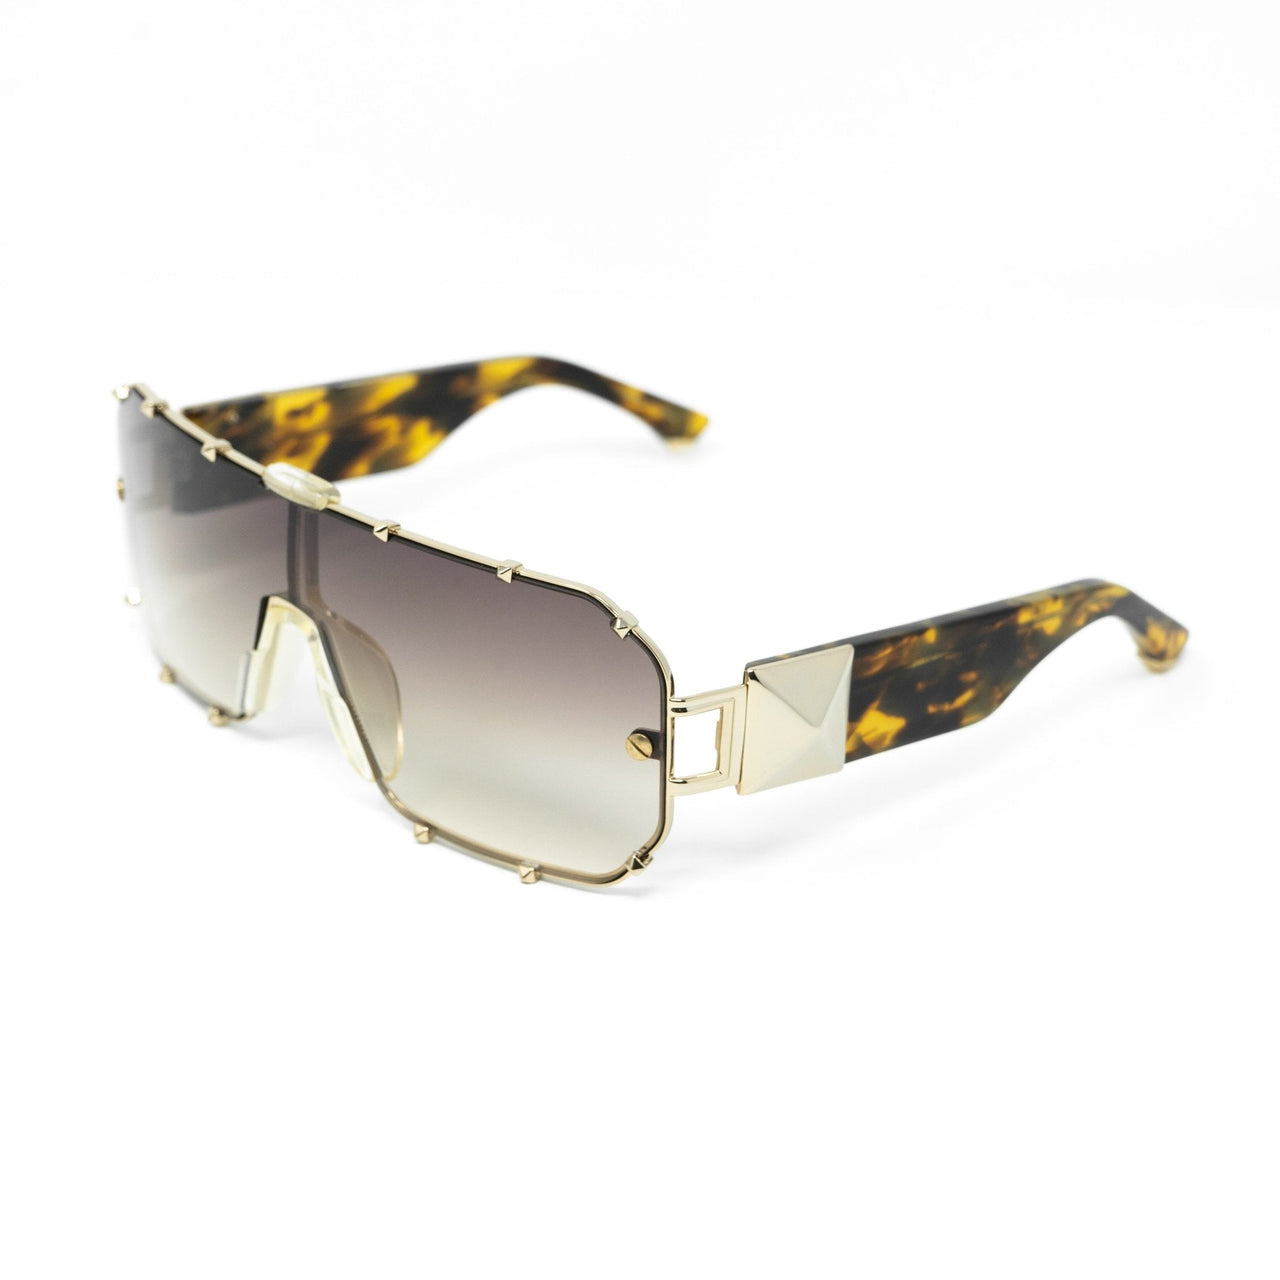 Giles Deacon Sunglasses Shield Tortoise Shell Gold With Category 3 Brown Graduated Lenses 9GILES1C1TSHELL - Watches & Crystals